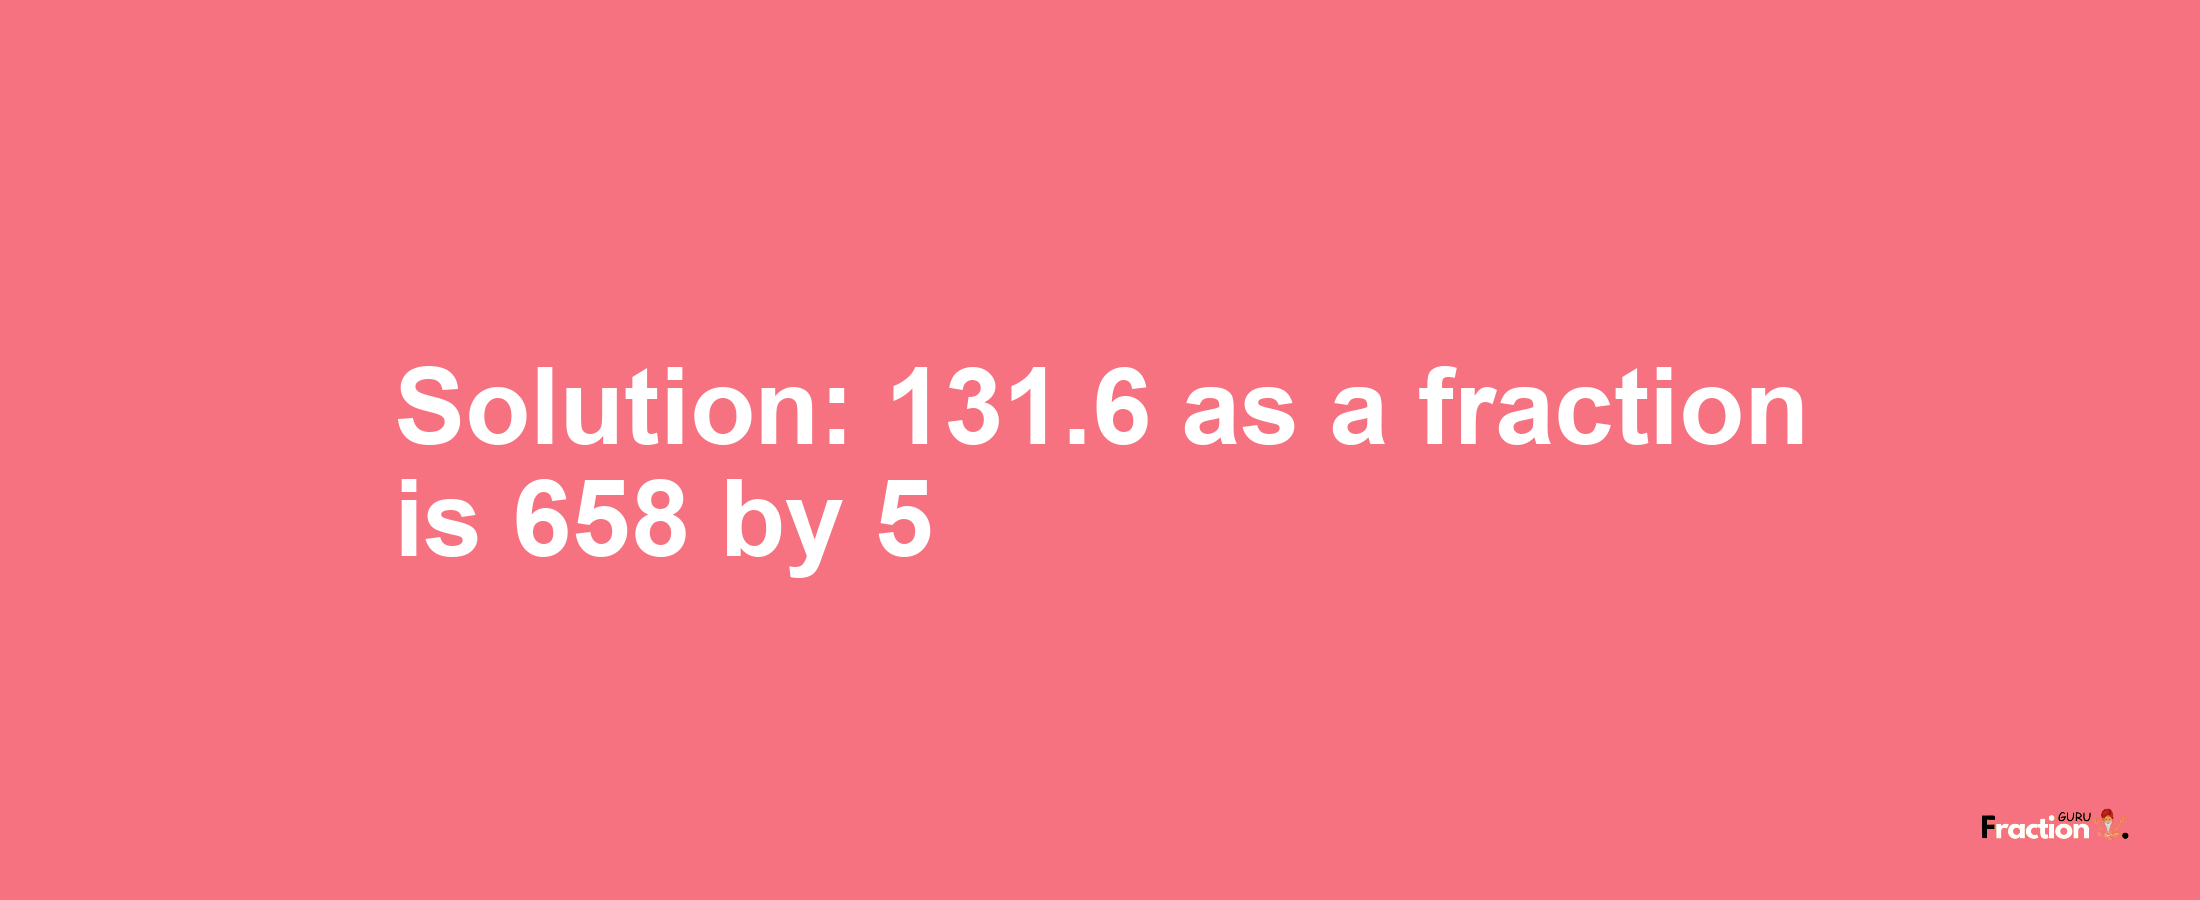 Solution:131.6 as a fraction is 658/5